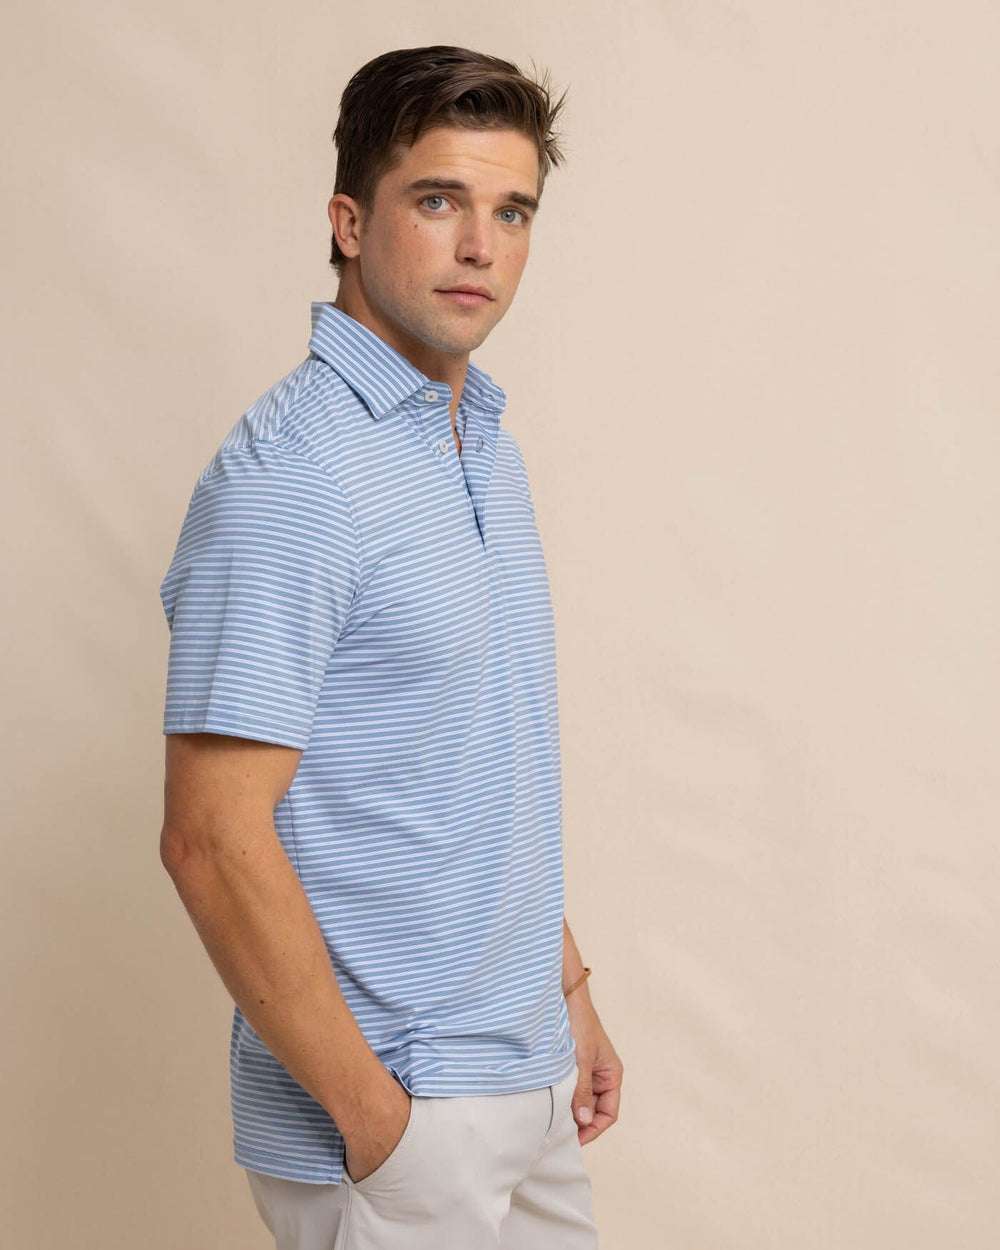 The front view of the Southern Tide brrr eeze Beattie Stripe Performance Polo by Southern Tide - Windward Blue